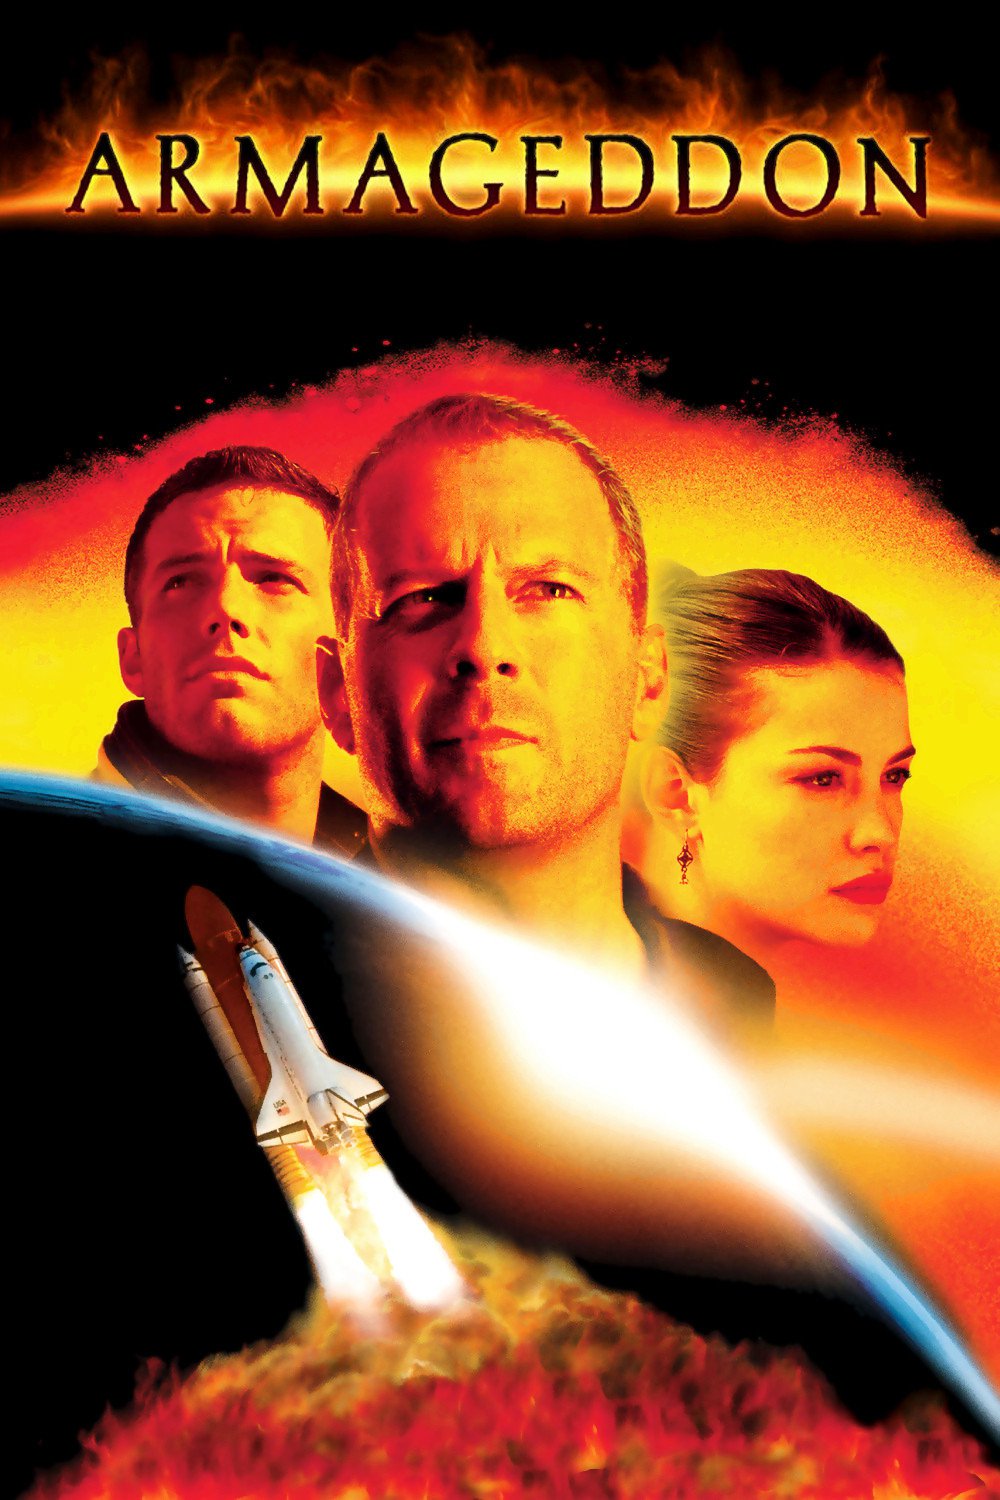 movie review for armageddon time